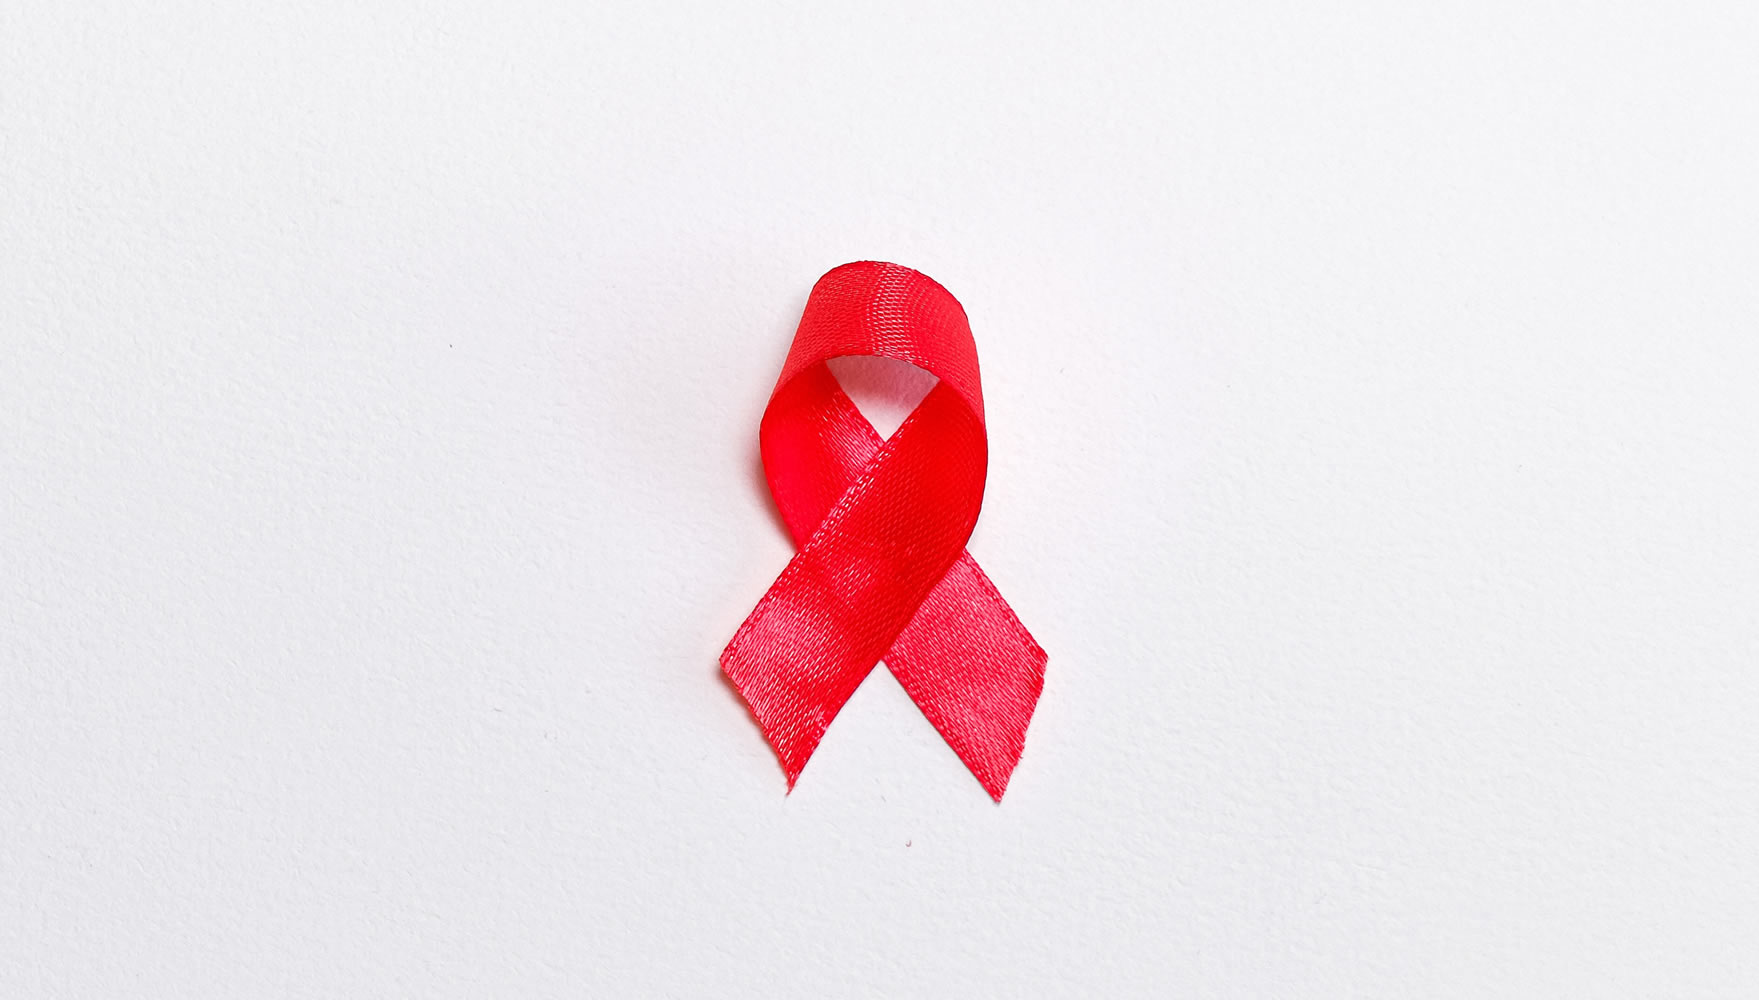 13th Annual HIV / AIDS Update Meeting